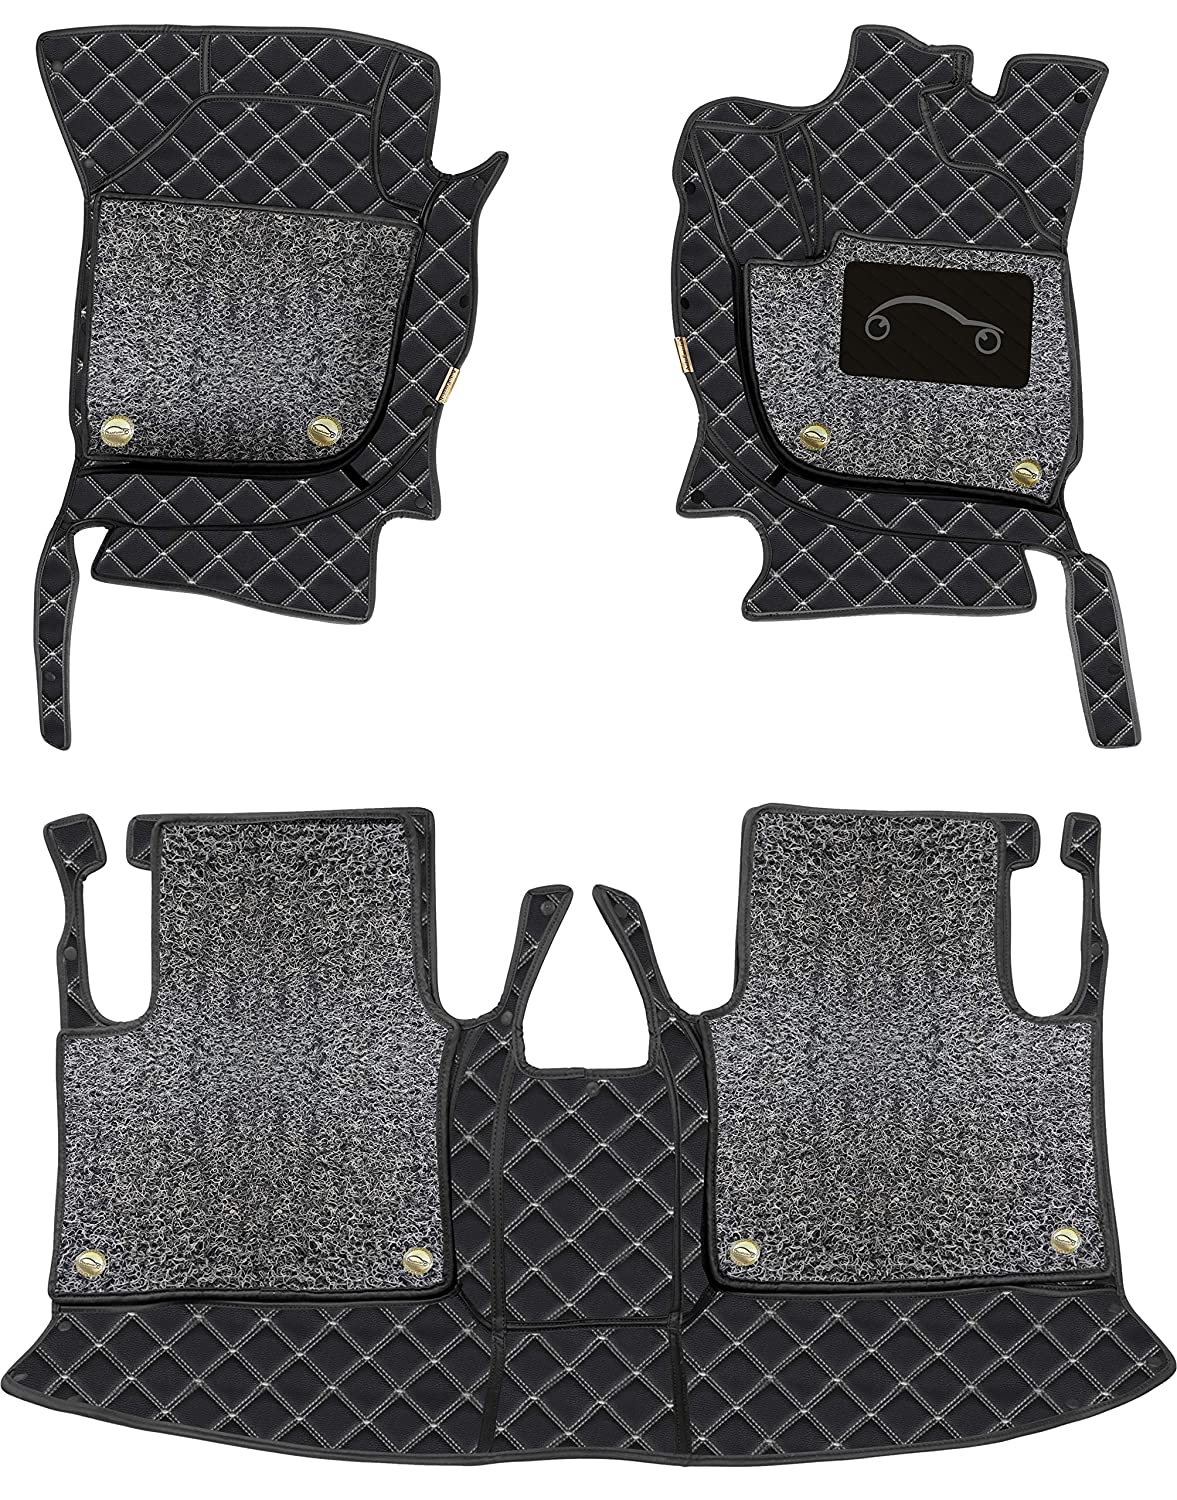 Mercedes B200 2015 7D Luxury Car Mat, All Weather Proof, Anti-Skid, 100% Waterproof & Odorless with Unique Diamond Fish Design (24mm Luxury PU Leather, 2 Rows)